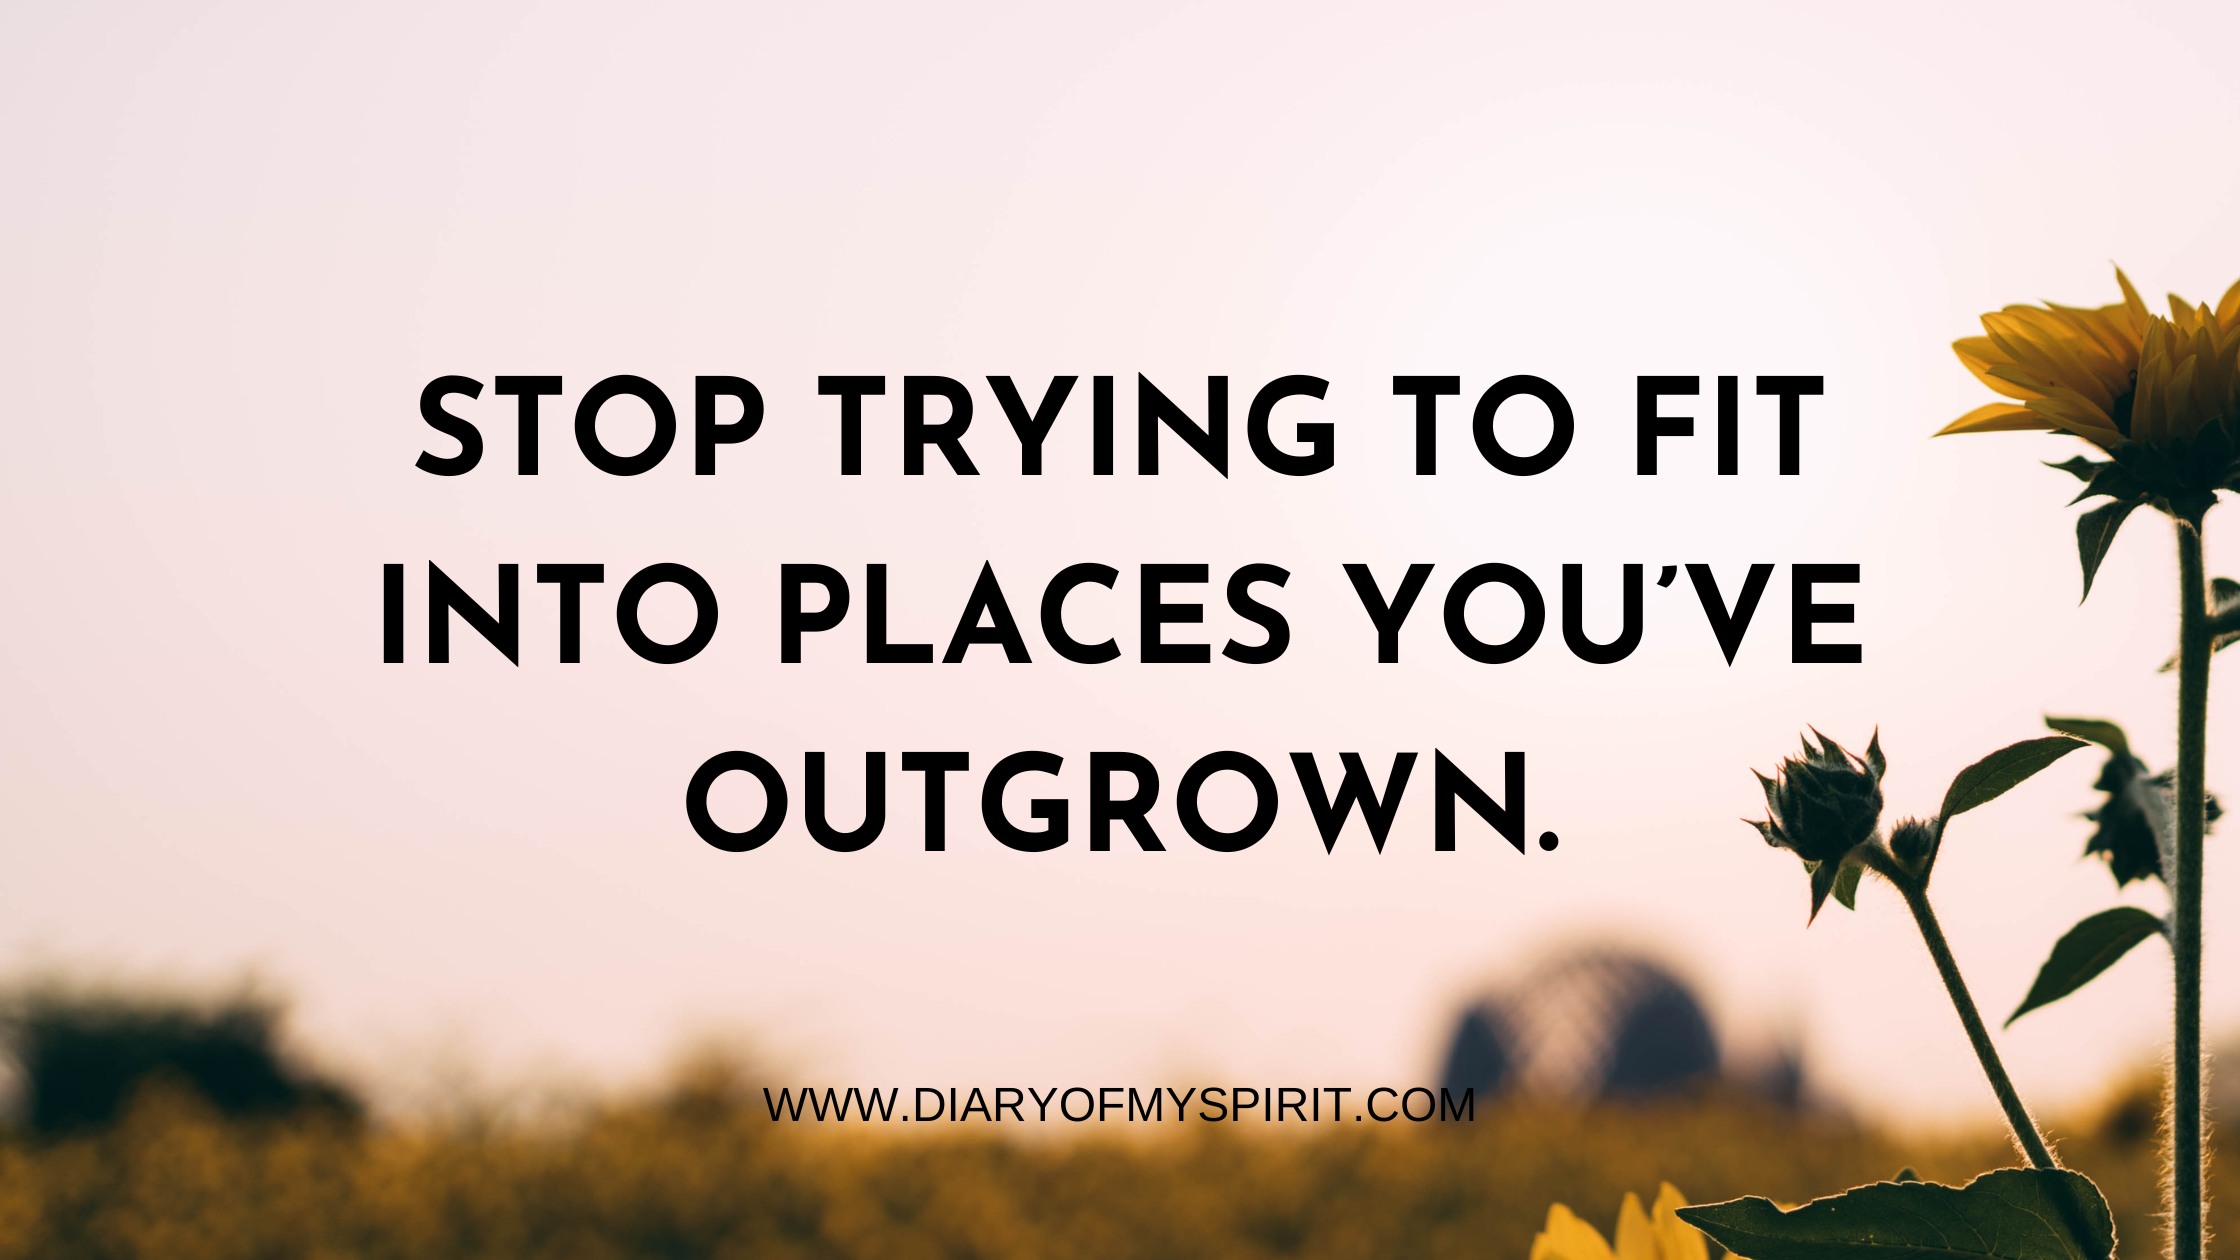 Stop trying to fit into places you've outgrown. life mottos to live by. life motto. life mottos. motto quote. mottos in life. mottos about life. mottos for life. motto life. motto in life. motto to live by. life's mottos. mottos examples. motto quotes. motto examples. examples of motto. personal motto. mottos to live by. good mottos. best mottos. personal mottos.